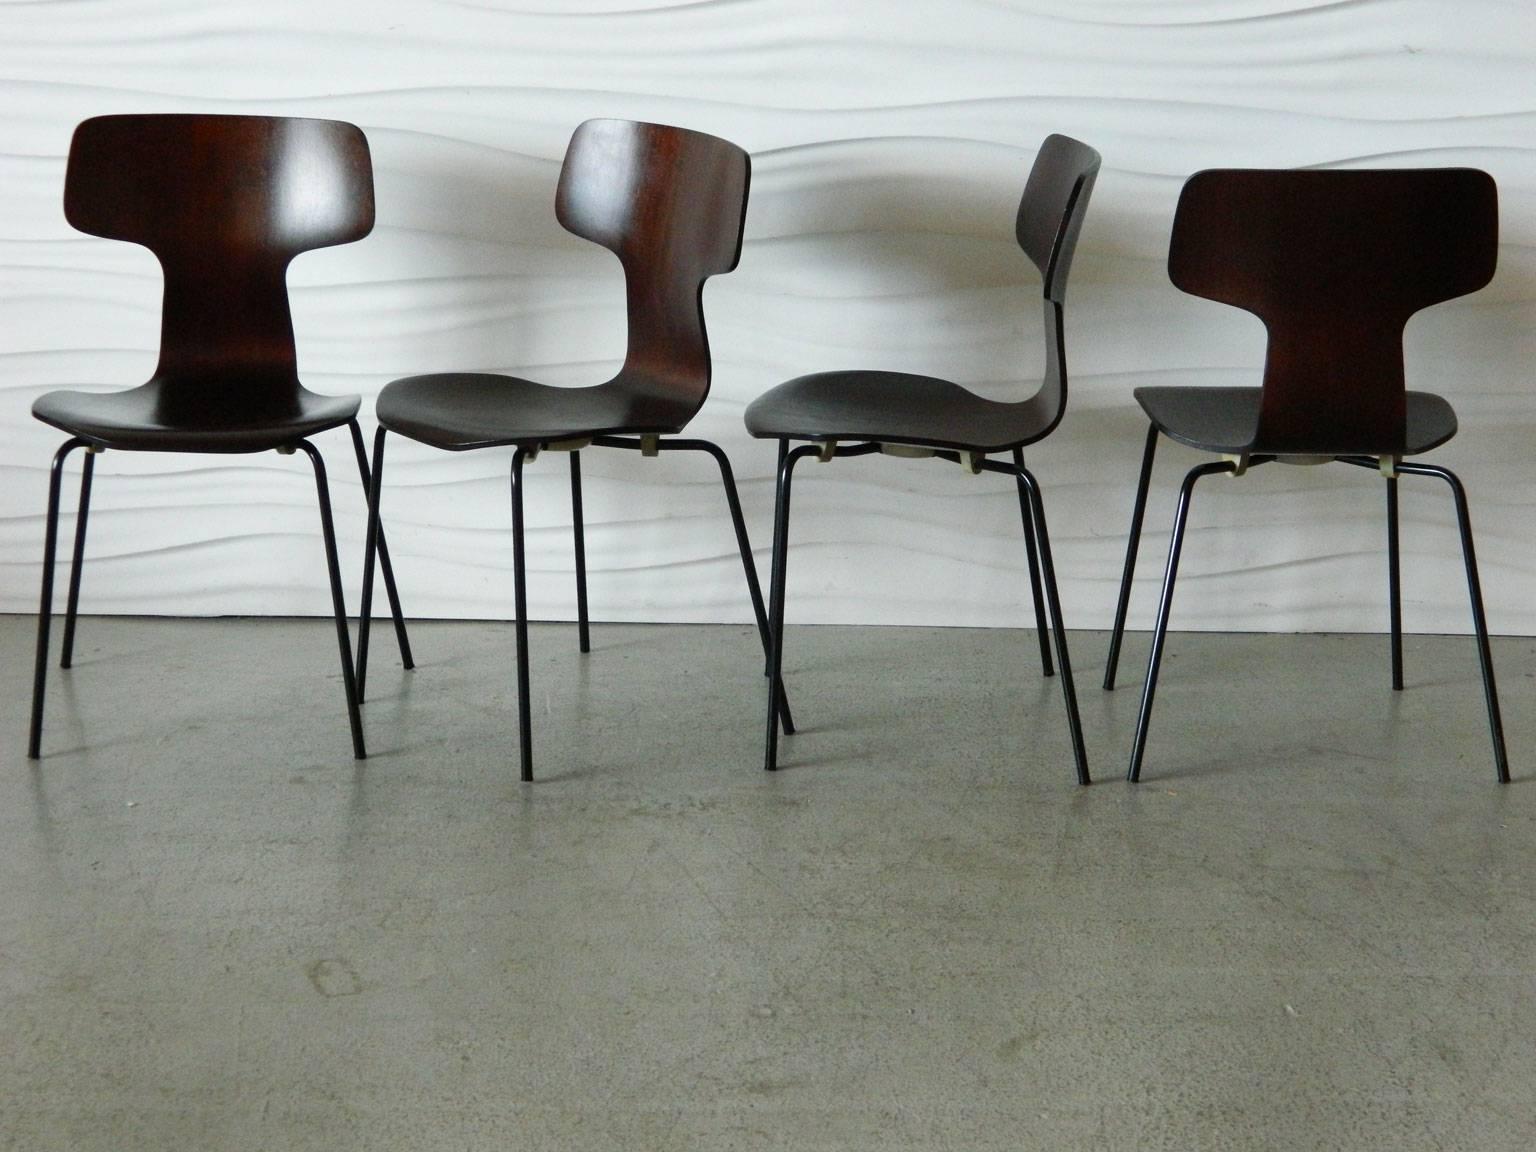 The 3103 chair (also known as the Hammer chair or "T" chair) was designed by Danish designer Arne Jacobsen in 1957 in collaboration with Dr. E. Snorason to improve lumbar support. The chairs have metal frames and the seats are made of